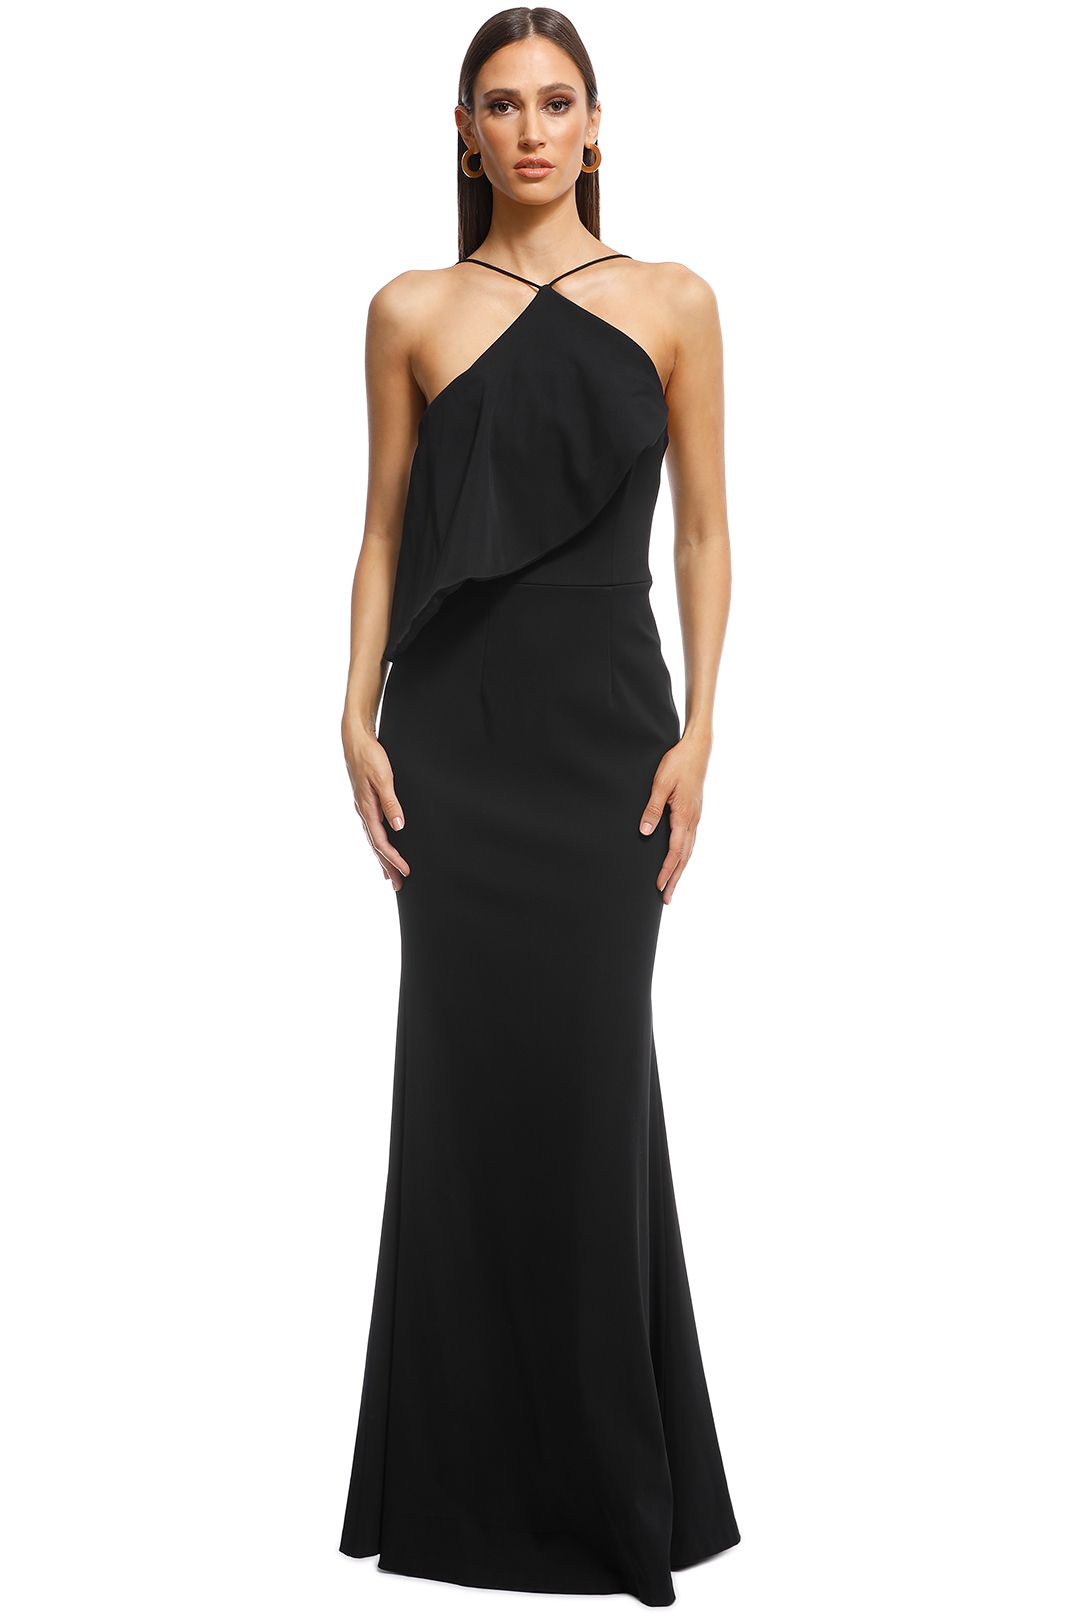 Talulah - After The Storm Gown - Black - Front